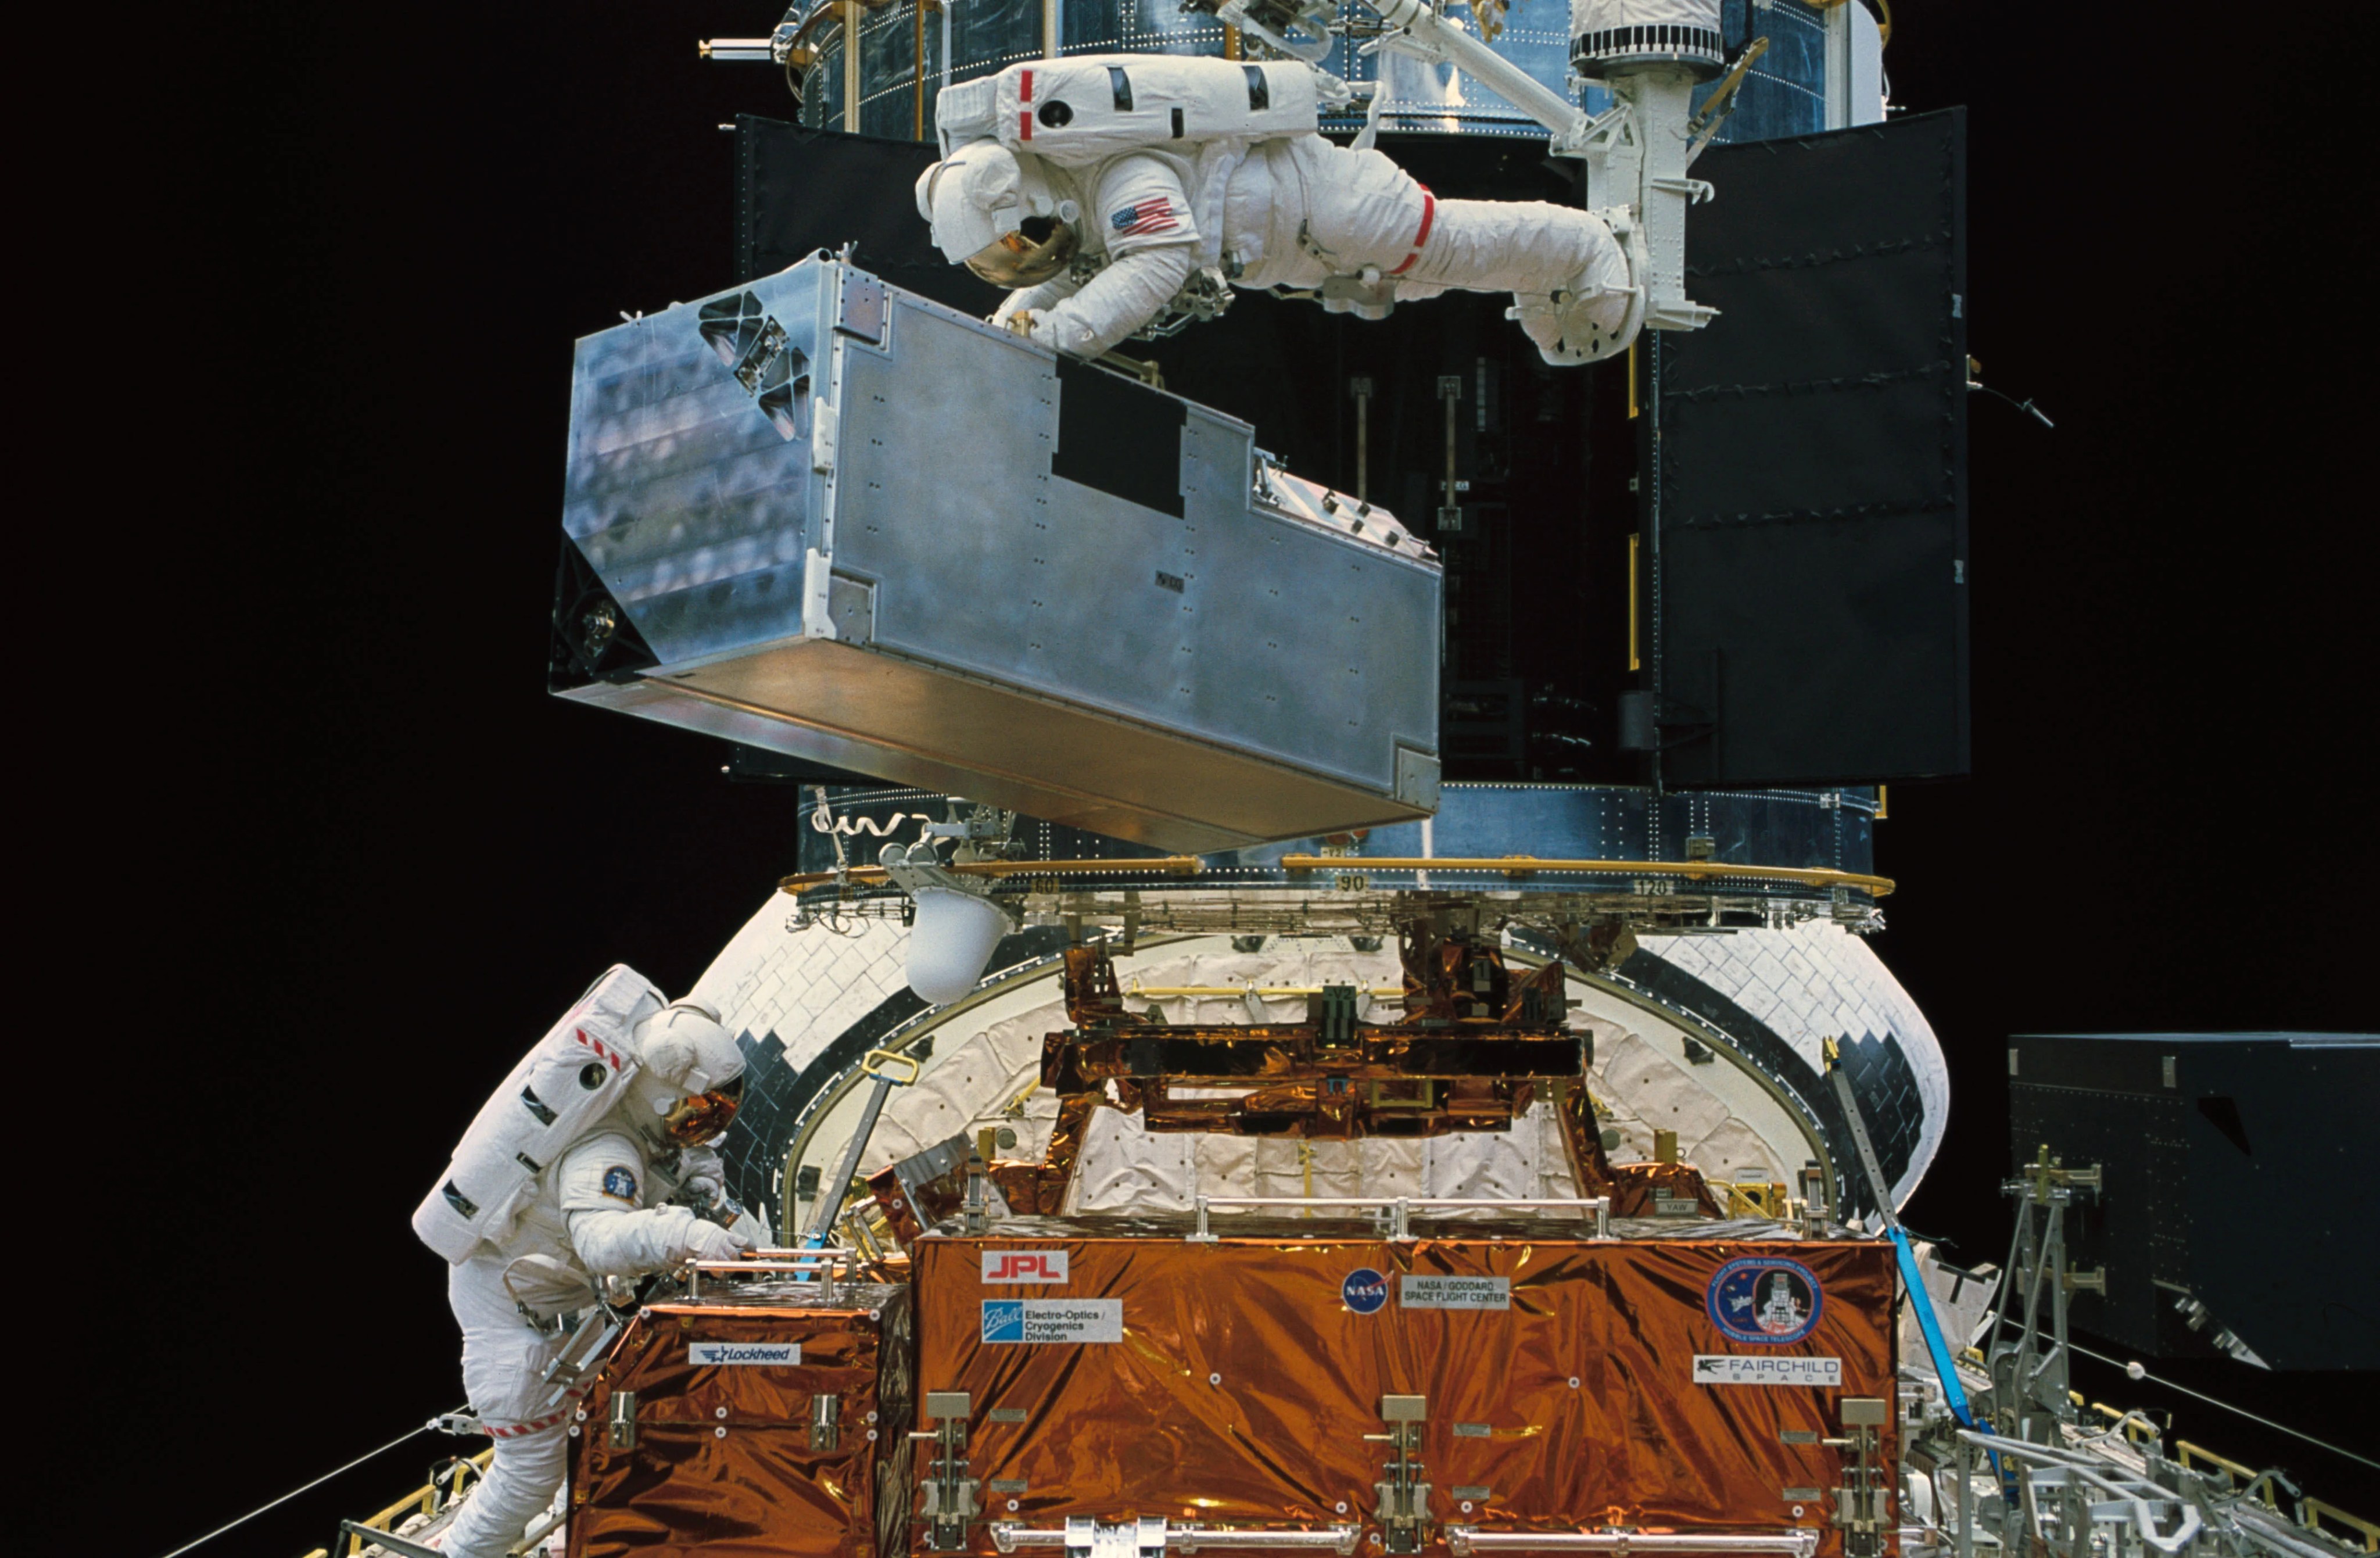 Anastronaut on the end of the Shuttle's robotic arm moves COSTAR toward Hubble for installtion.